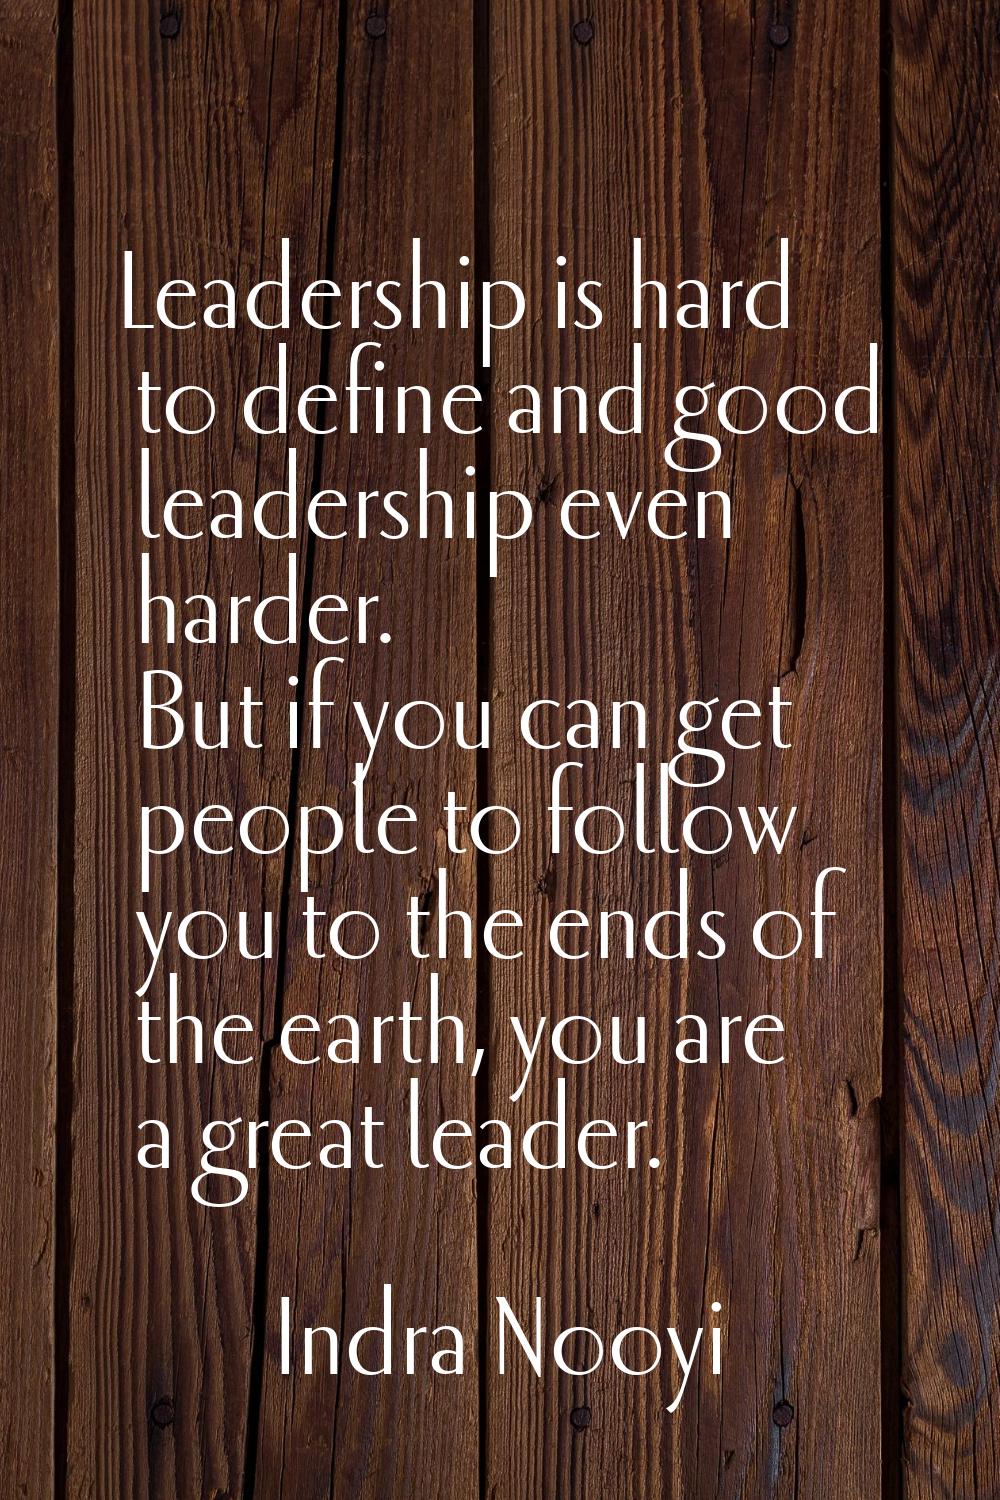 Leadership is hard to define and good leadership even harder. But if you can get people to follow y